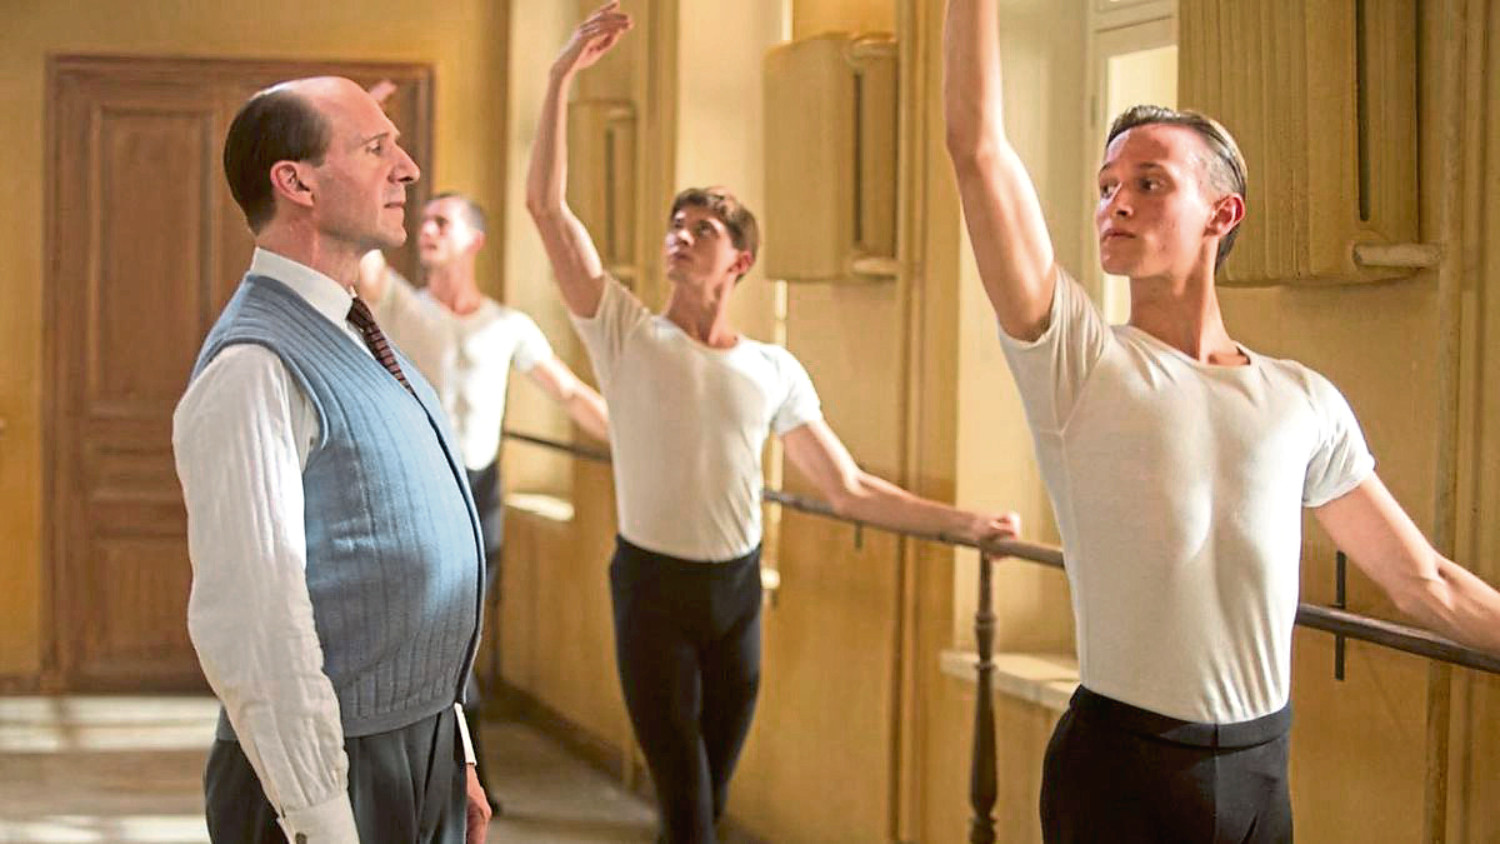 Ralph Fiennes directs The White Crow, the story of Rudolf Nureyev’s defection to the West